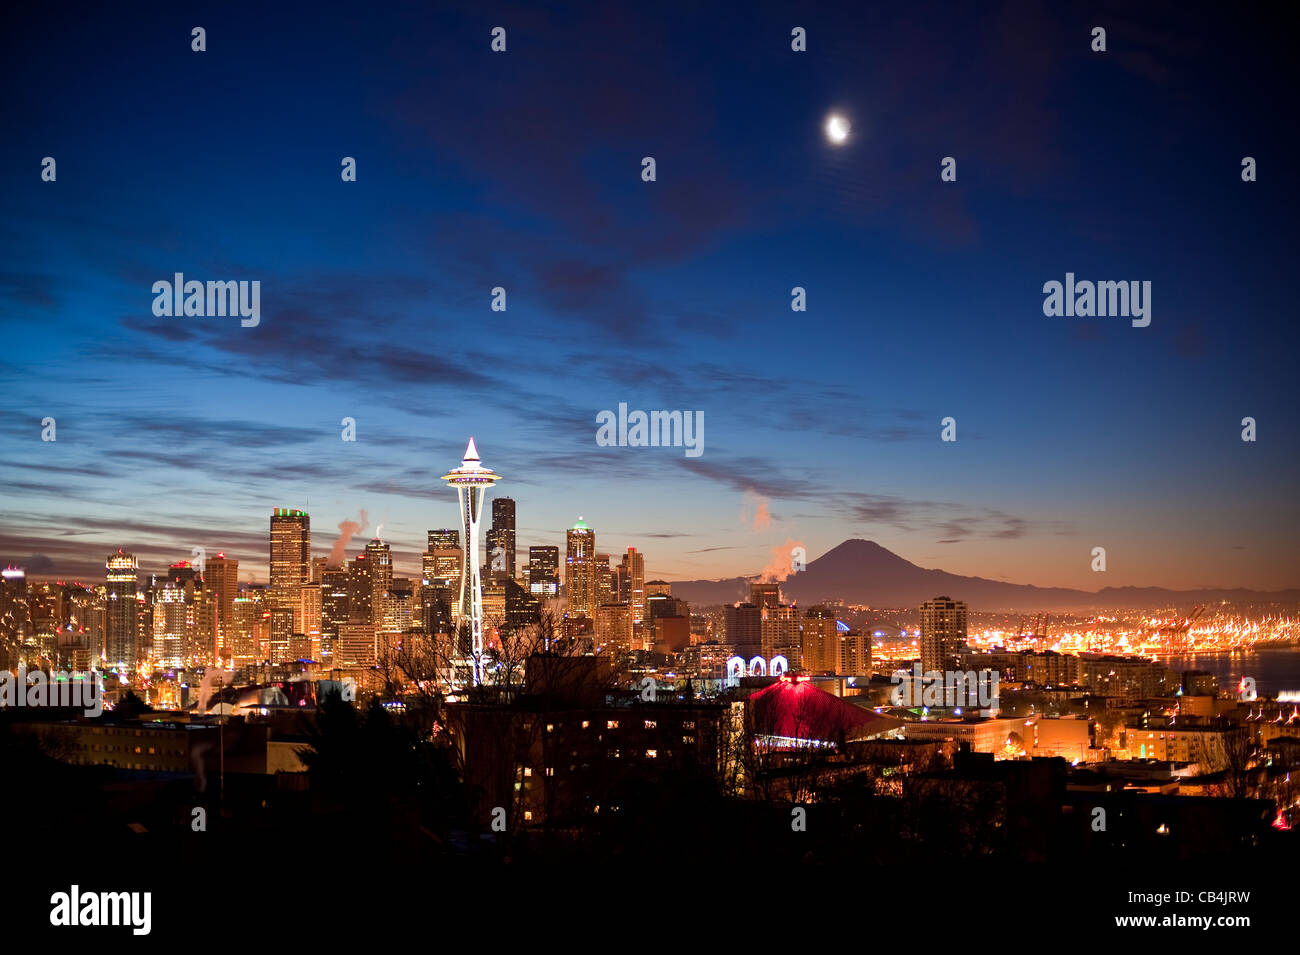 Retro Image of Seattle with moon and Space Needle with Mount Rainier and city lights. Stock Photo